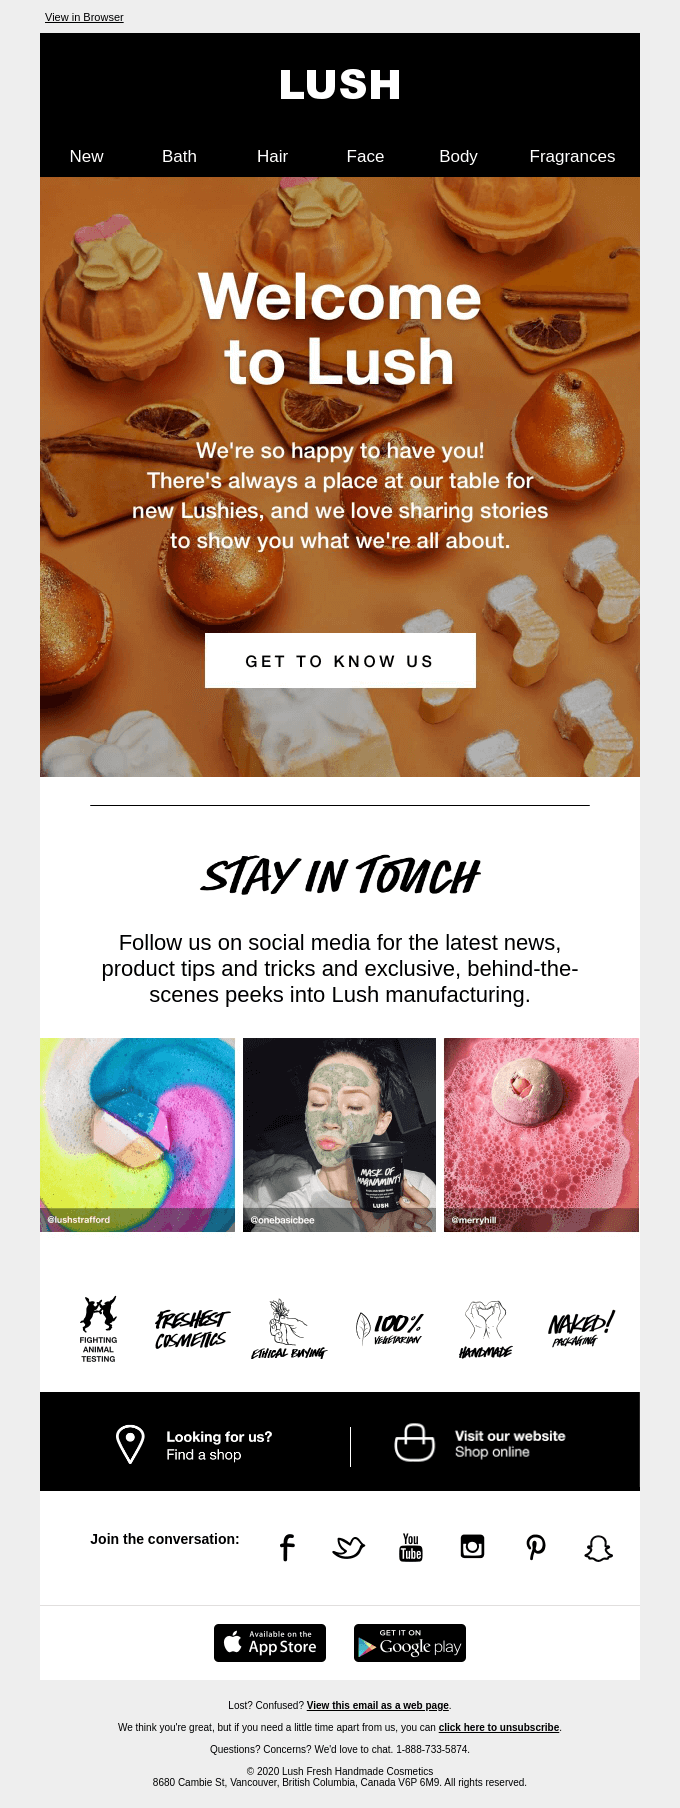 Example of a welcome email from Lush demonstrating how to use clear calls to action